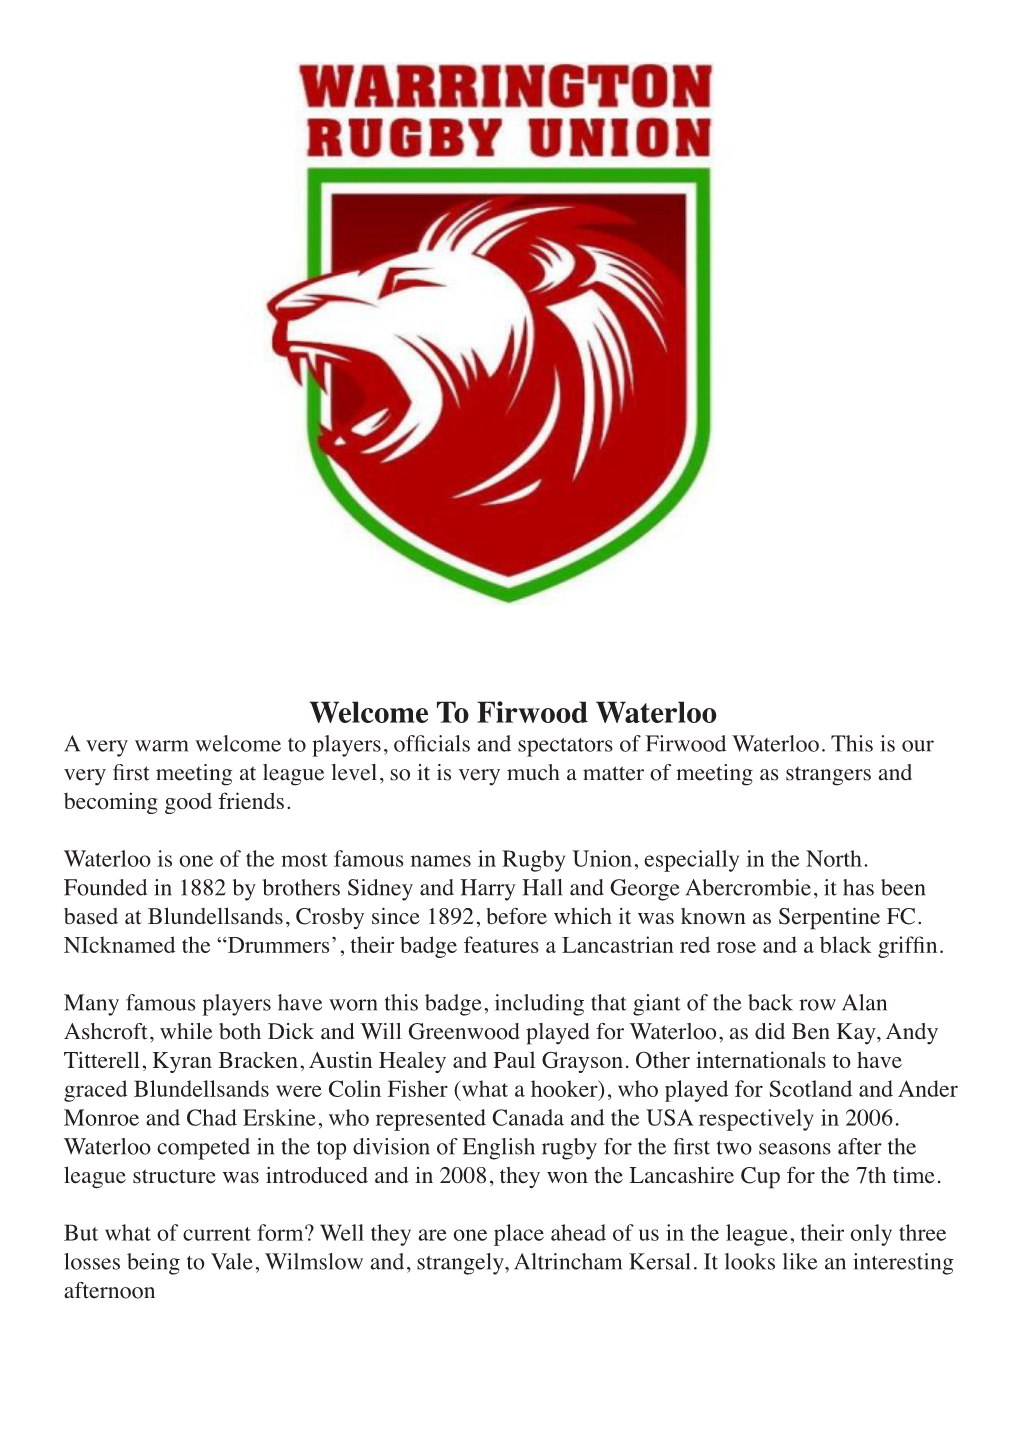 Welcome to Firwood Waterloo a Very Warm Welcome to Players, Officials and Spectators of Firwood Waterloo